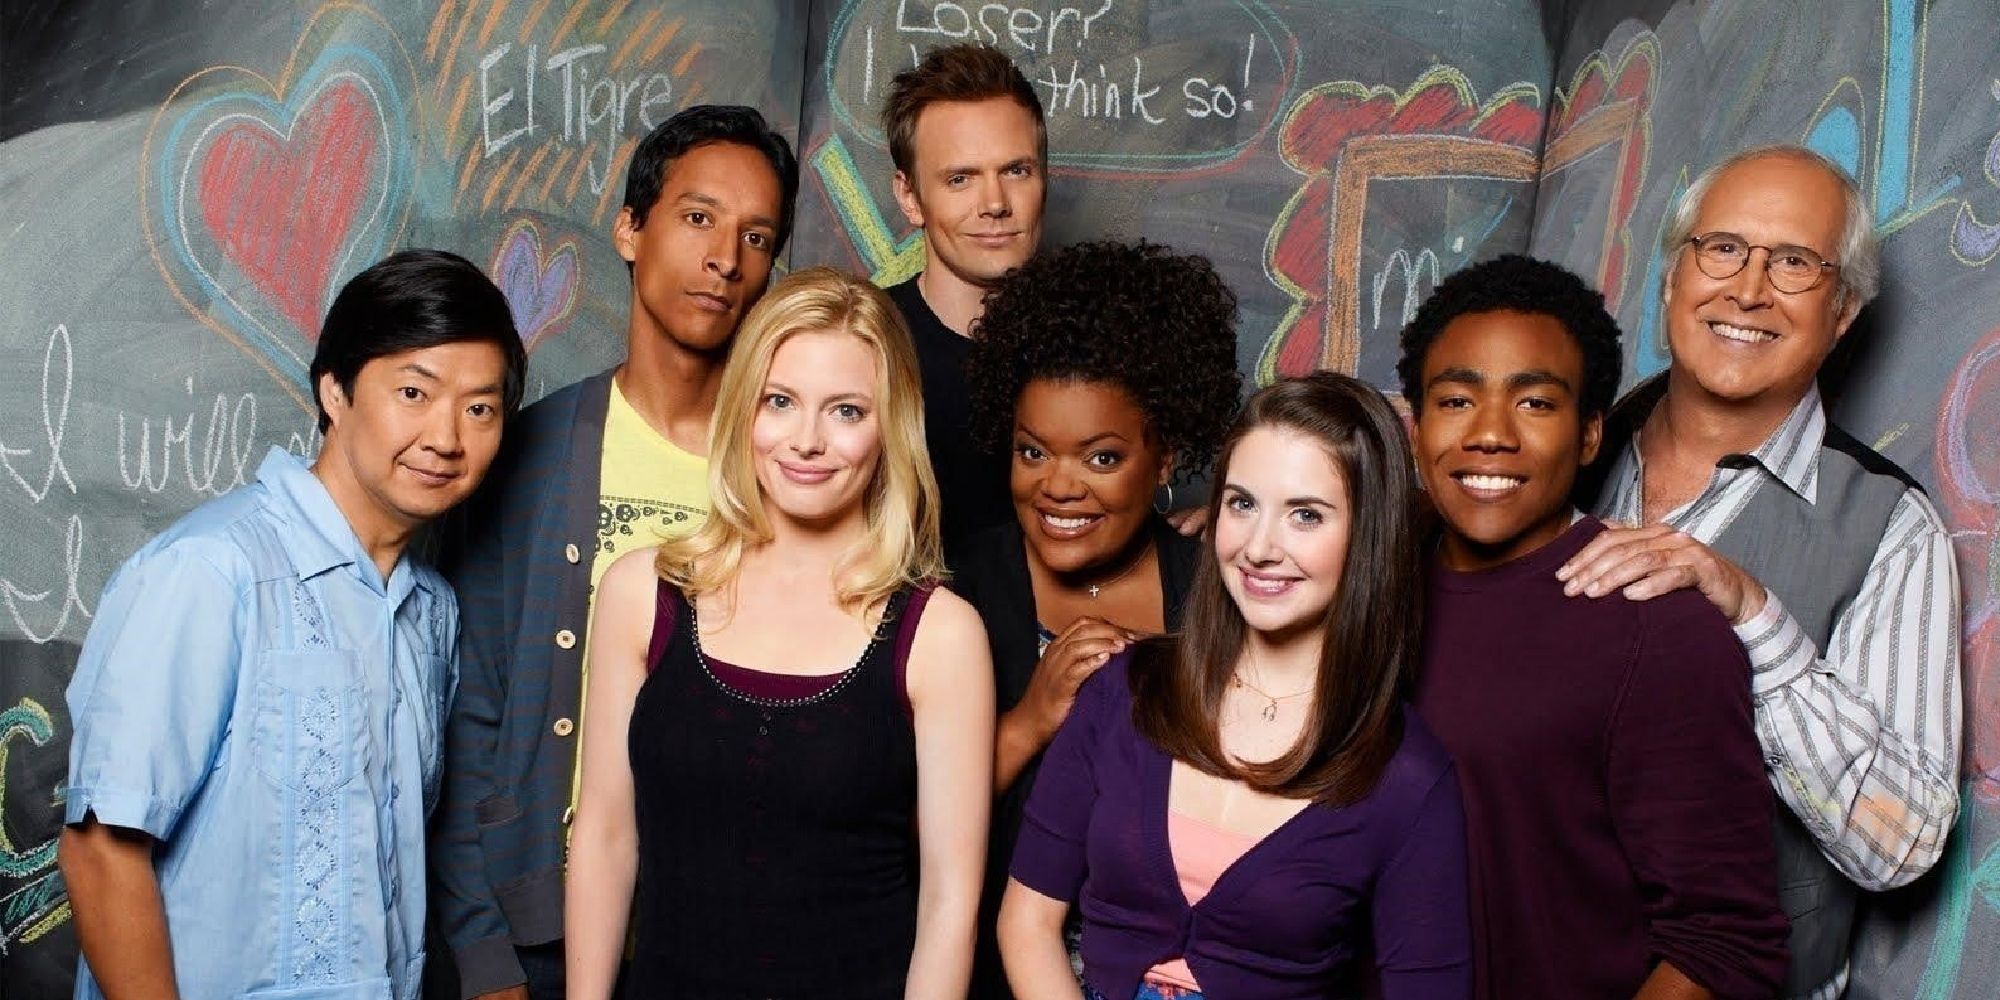 The main cast of Community posing for a promotional photo.